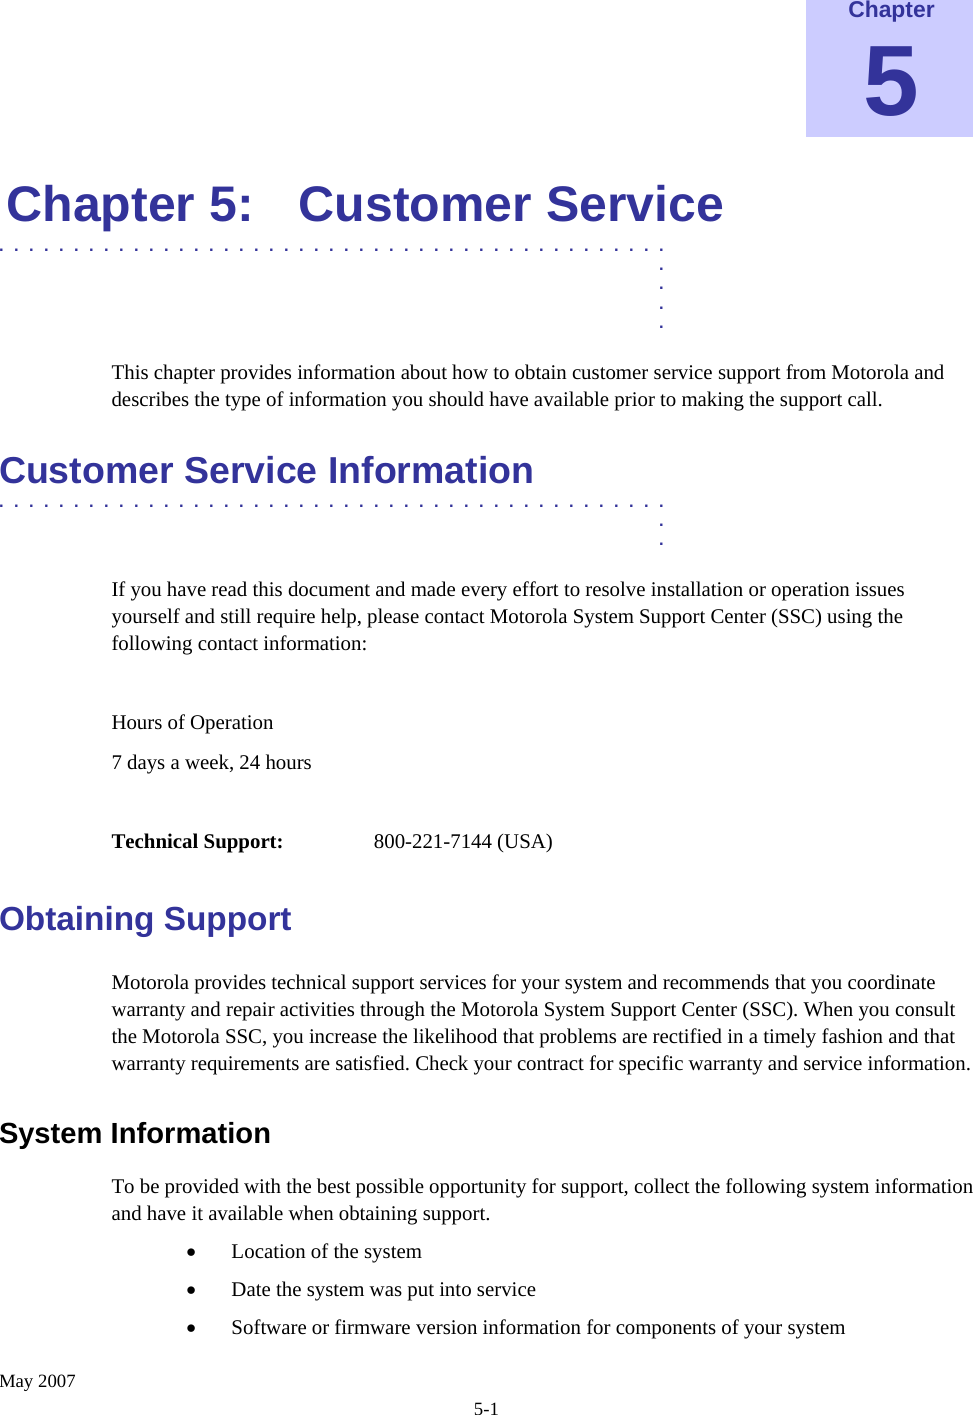    May 2007 5-1 Chapter 5 Chapter 5:  Customer Service .............................................  .  .  .  . This chapter provides information about how to obtain customer service support from Motorola and describes the type of information you should have available prior to making the support call. Customer Service Information .............................................  .  . If you have read this document and made every effort to resolve installation or operation issues yourself and still require help, please contact Motorola System Support Center (SSC) using the following contact information:  Hours of Operation 7 days a week, 24 hours  Technical Support:   800-221-7144 (USA) Obtaining Support Motorola provides technical support services for your system and recommends that you coordinate warranty and repair activities through the Motorola System Support Center (SSC). When you consult the Motorola SSC, you increase the likelihood that problems are rectified in a timely fashion and that warranty requirements are satisfied. Check your contract for specific warranty and service information. System Information  To be provided with the best possible opportunity for support, collect the following system information and have it available when obtaining support. • Location of the system • Date the system was put into service • Software or firmware version information for components of your system 